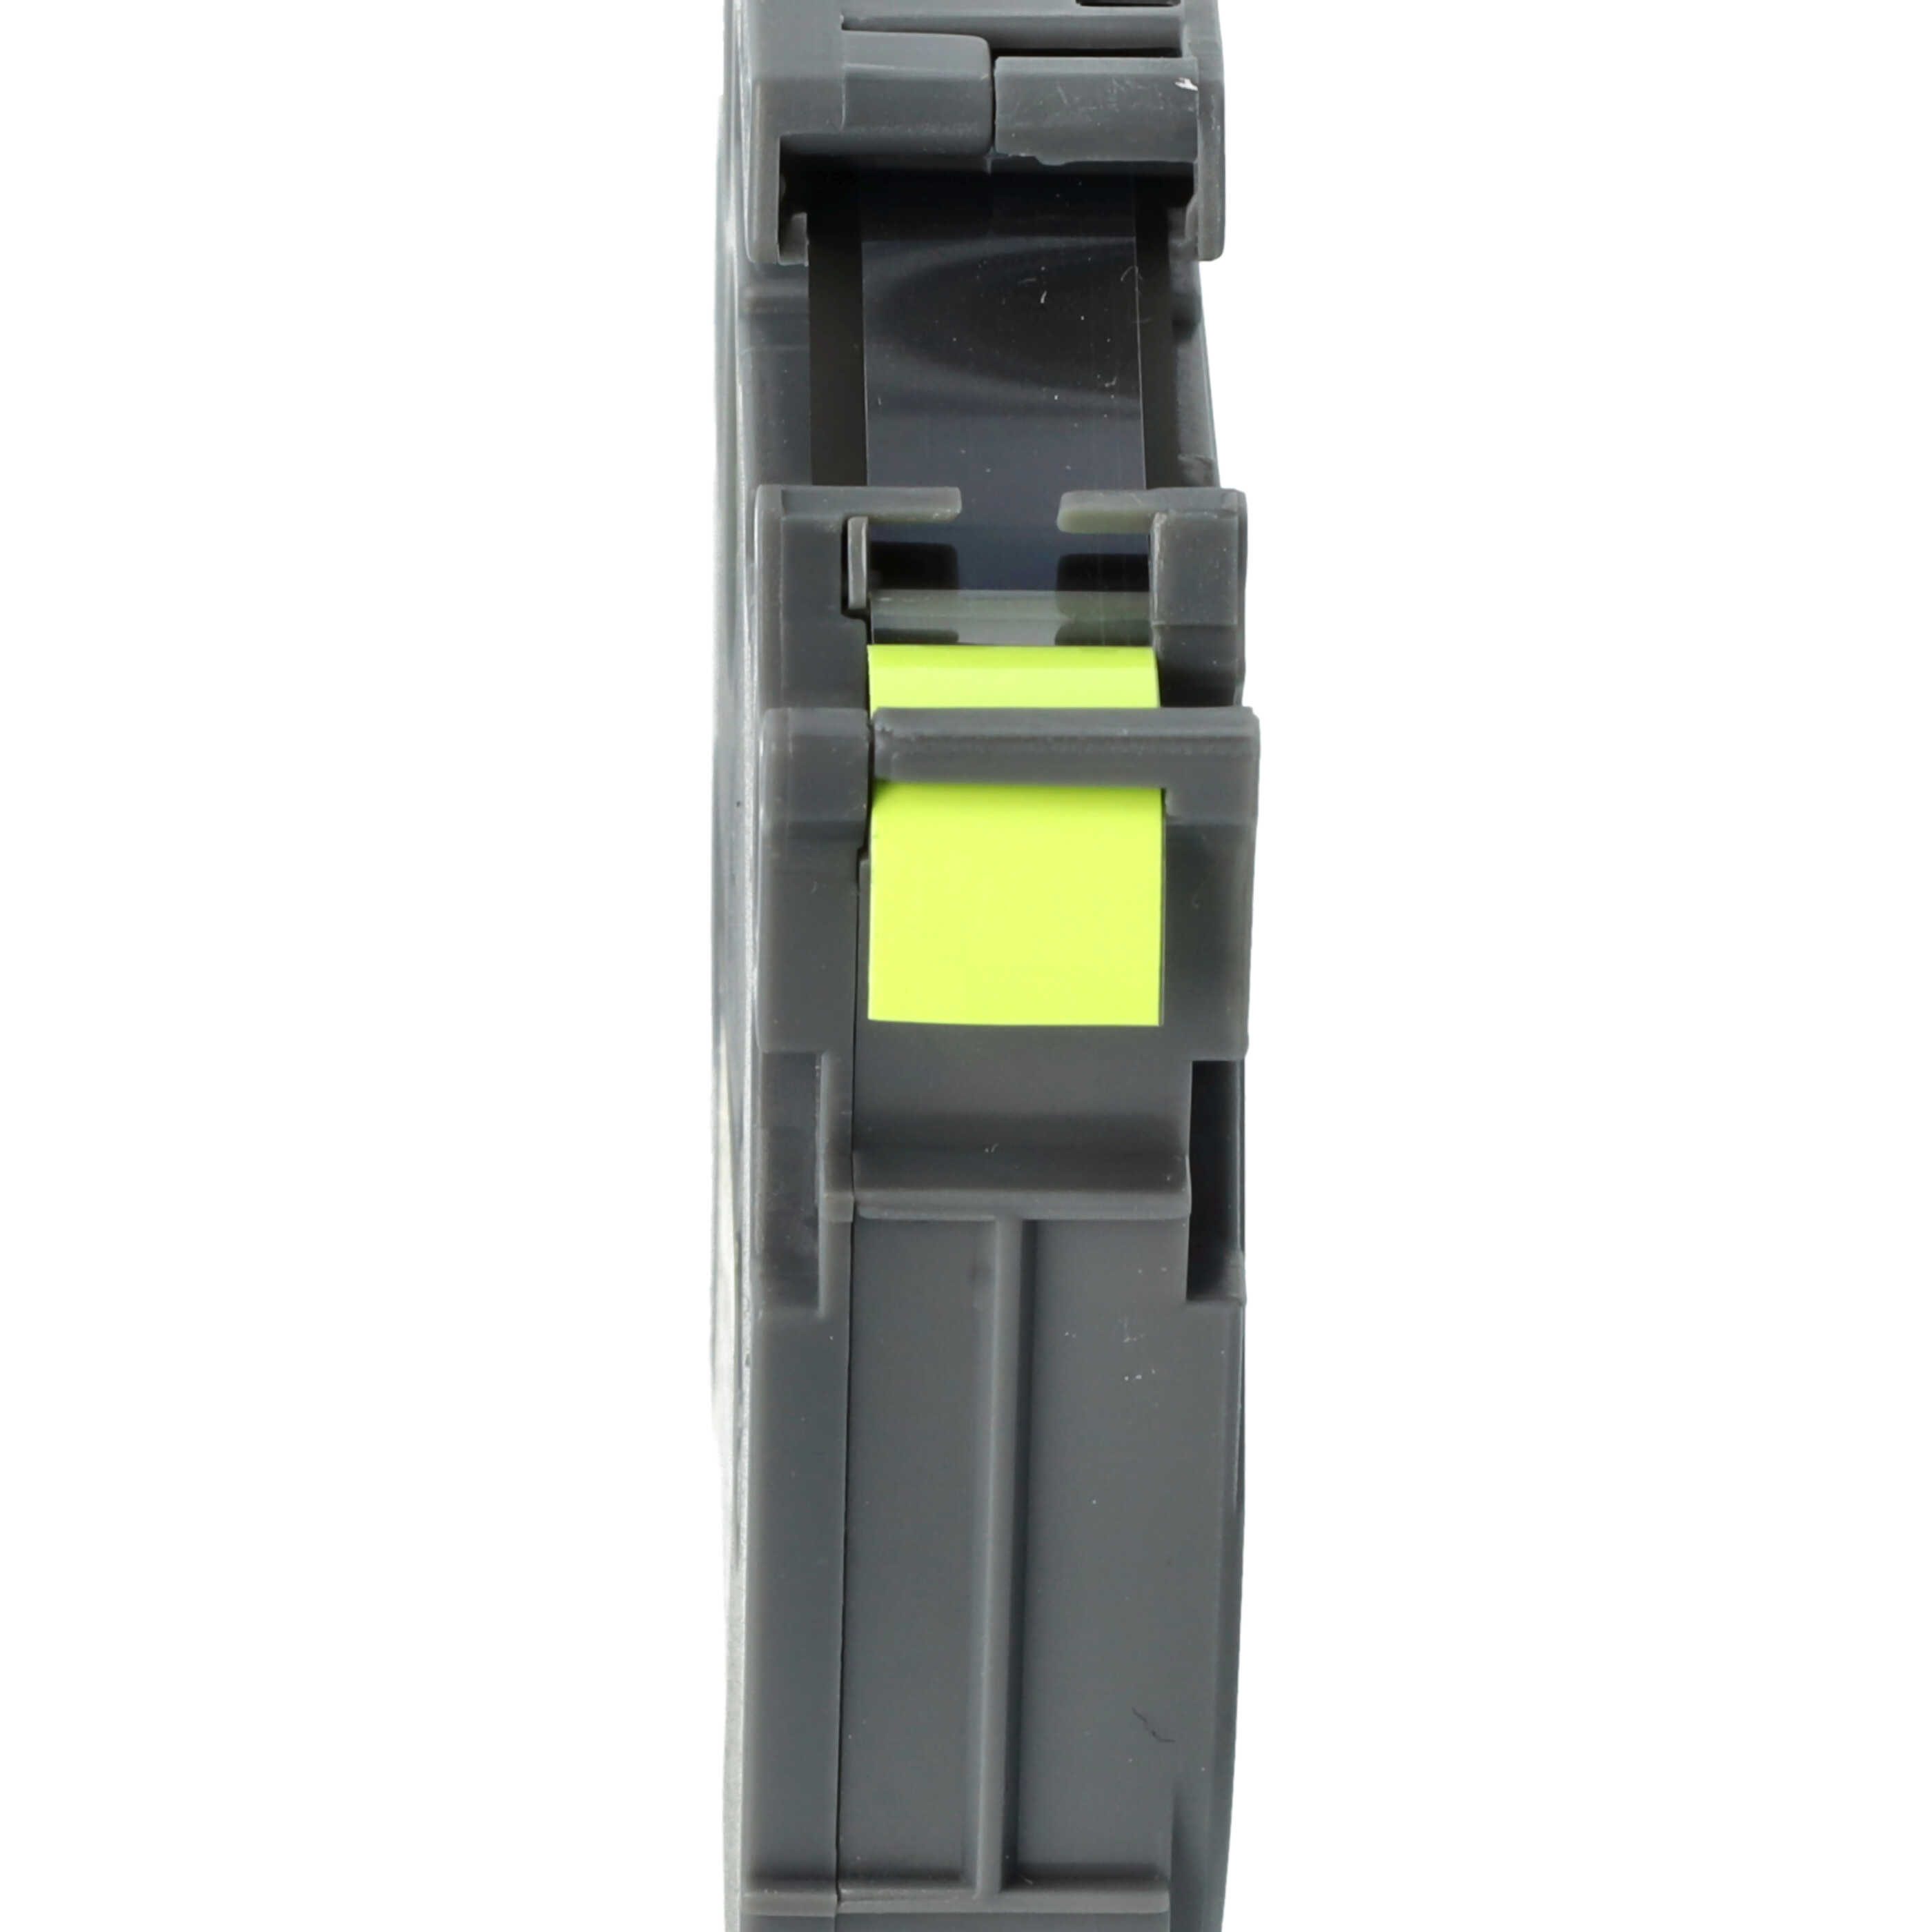 Label Tape as Replacement for Brother TZ-221, TZE-221 - 9 mm Black to Neon-Yellow